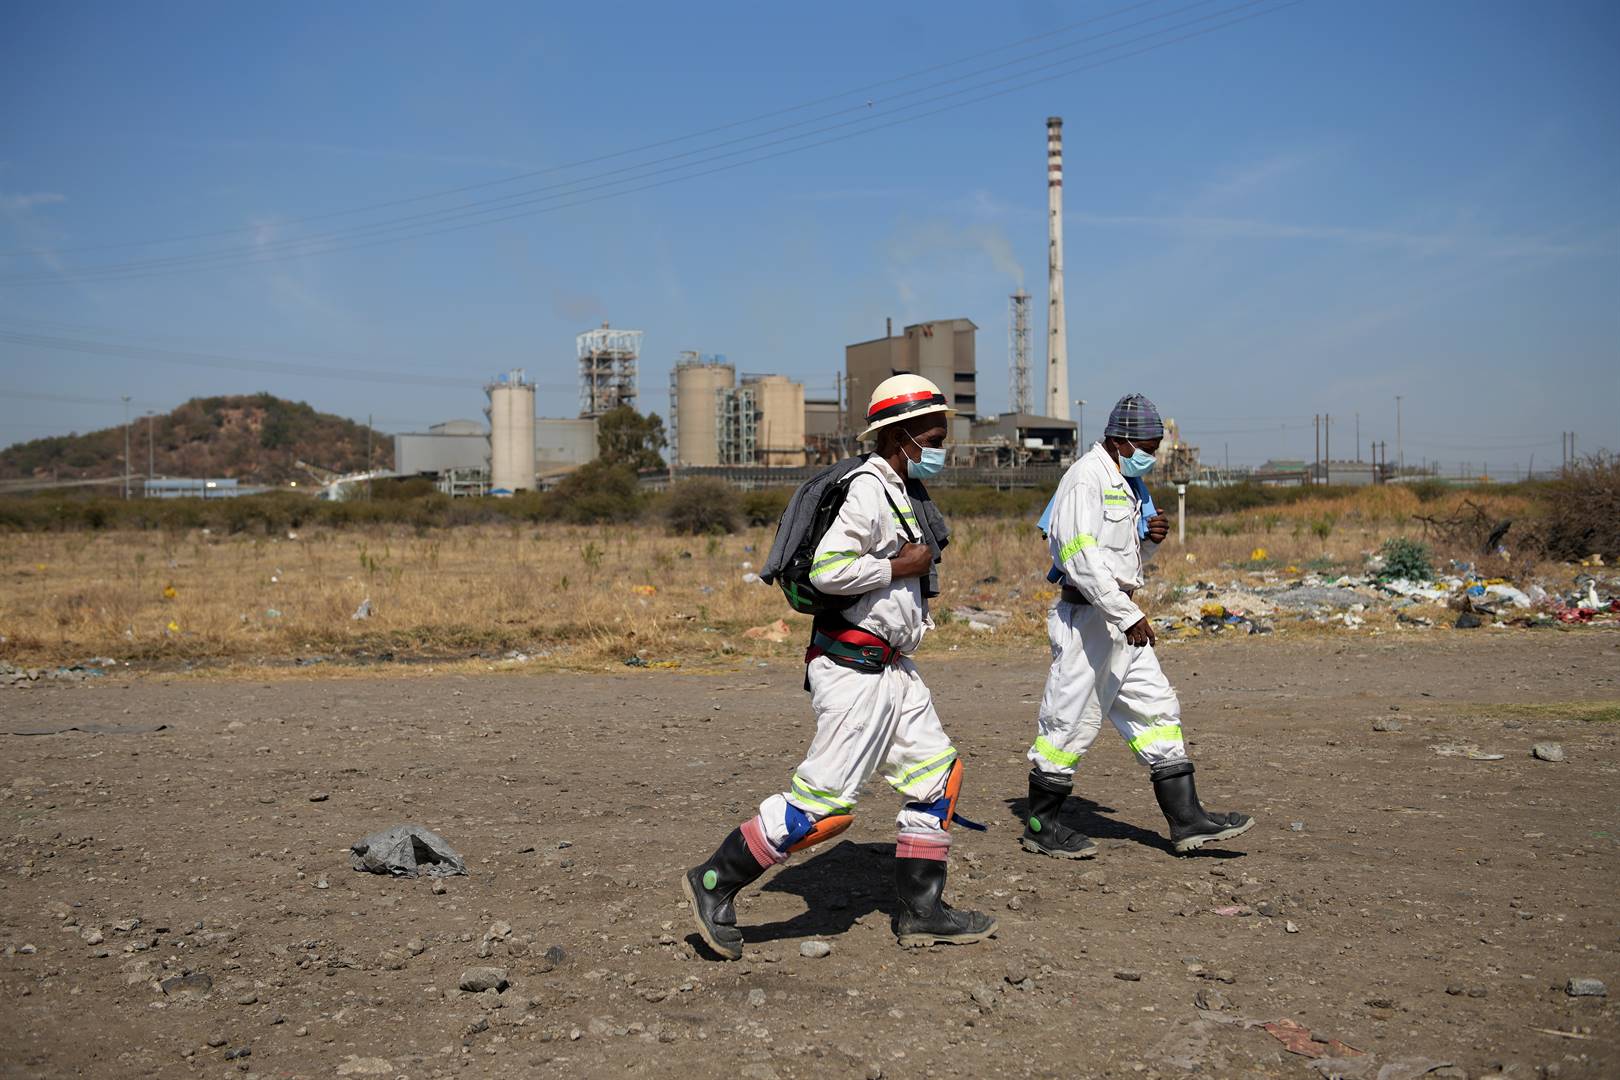 Two mine workers at Sibanye-Stillwater's Marikana operations walk home after their day shift. Photo: Tebogo Letsie